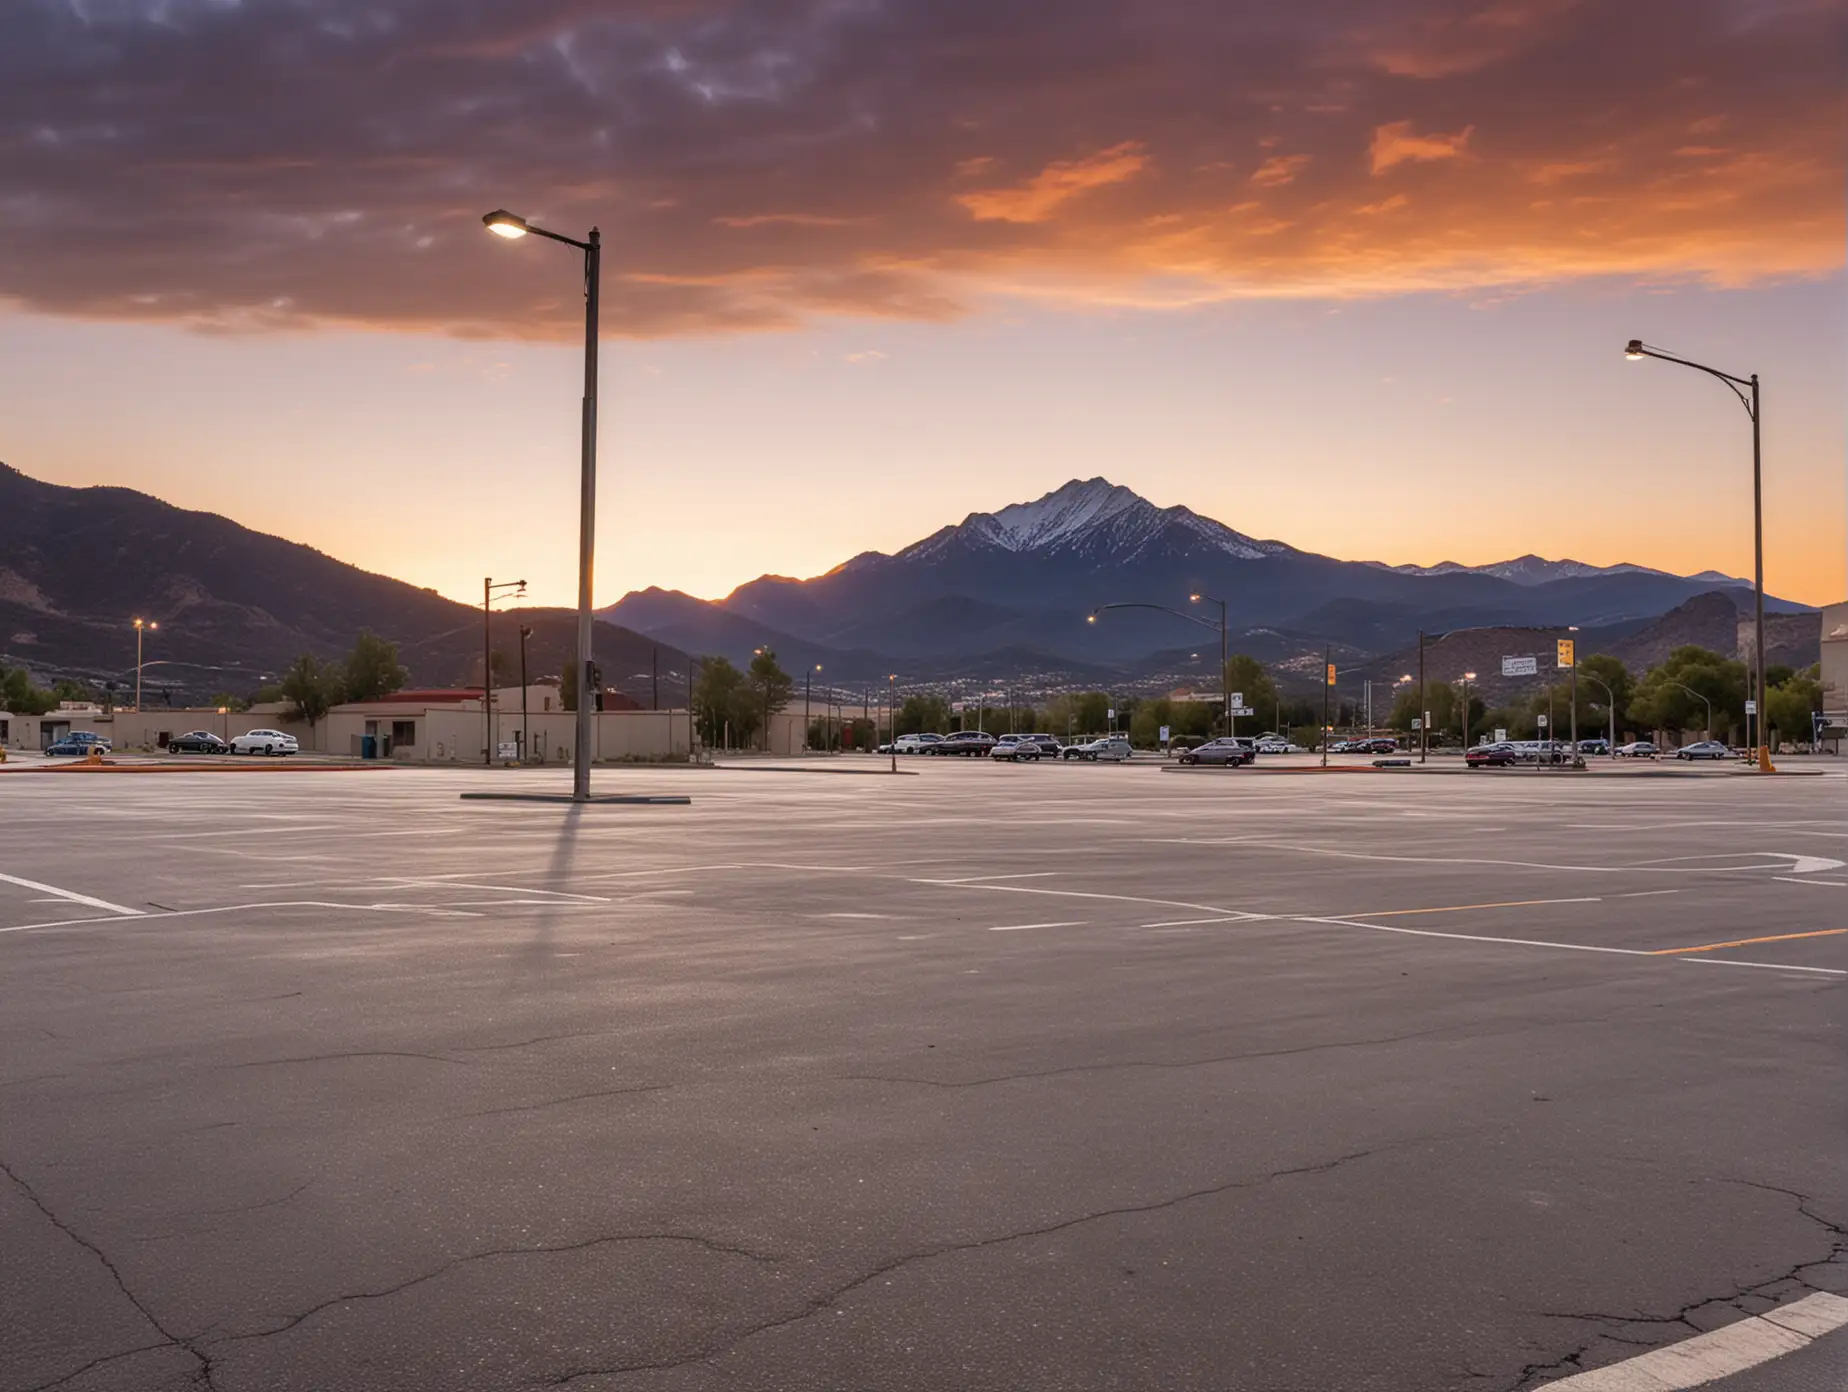 Desolate-Parking-Lot-with-Mountain-Backdrop-at-Sunset